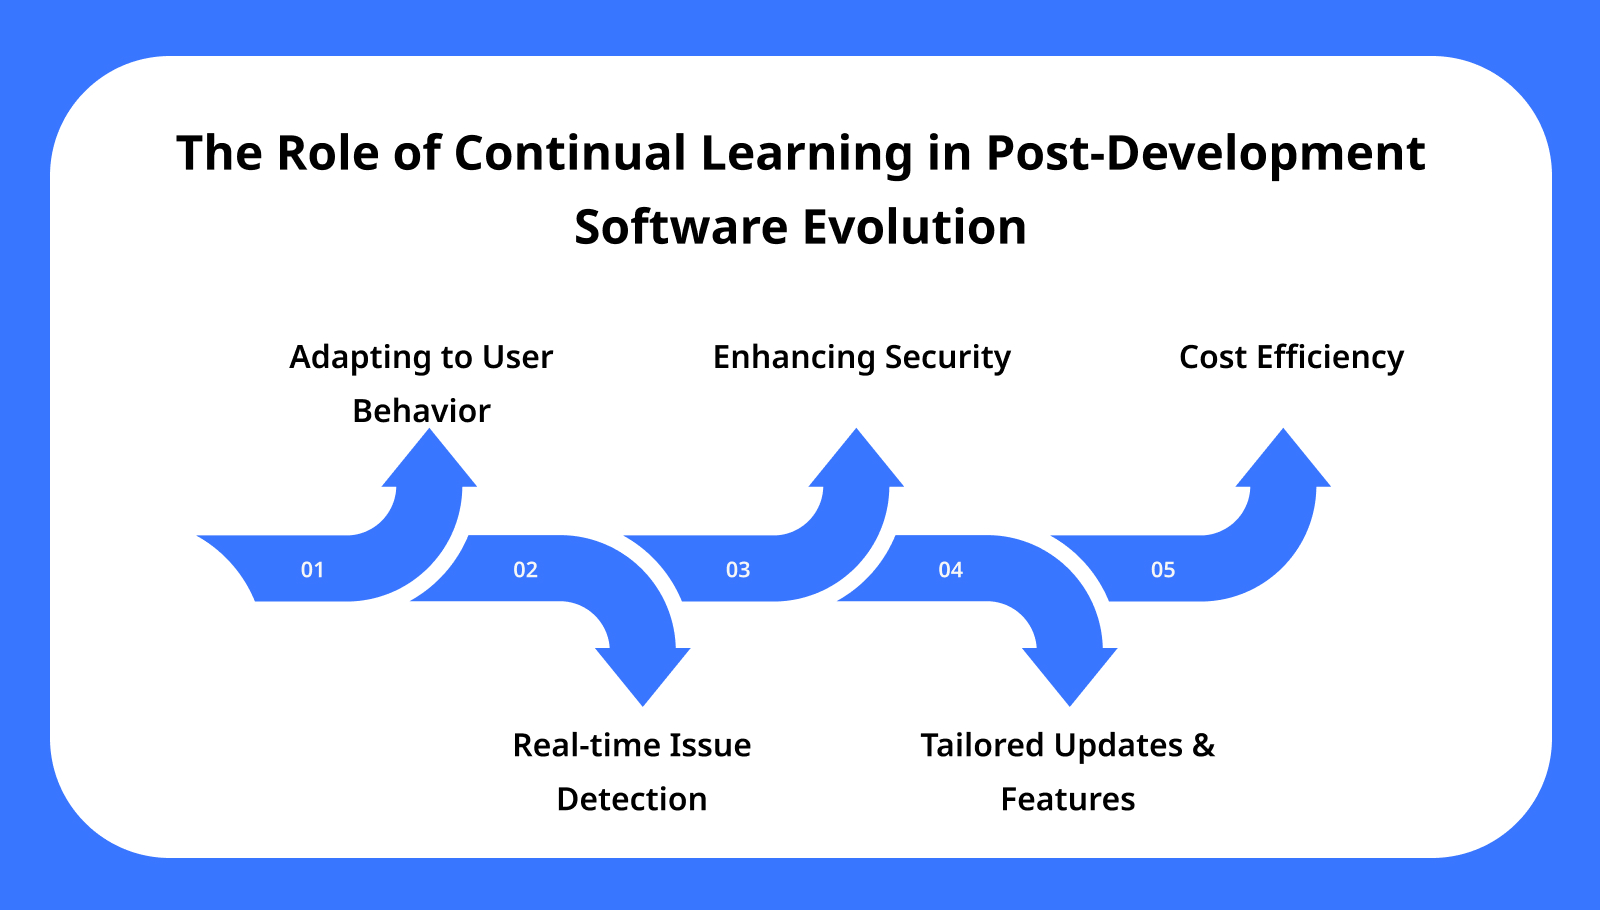 The Role of Continual Learning in Post Development Software Evolution